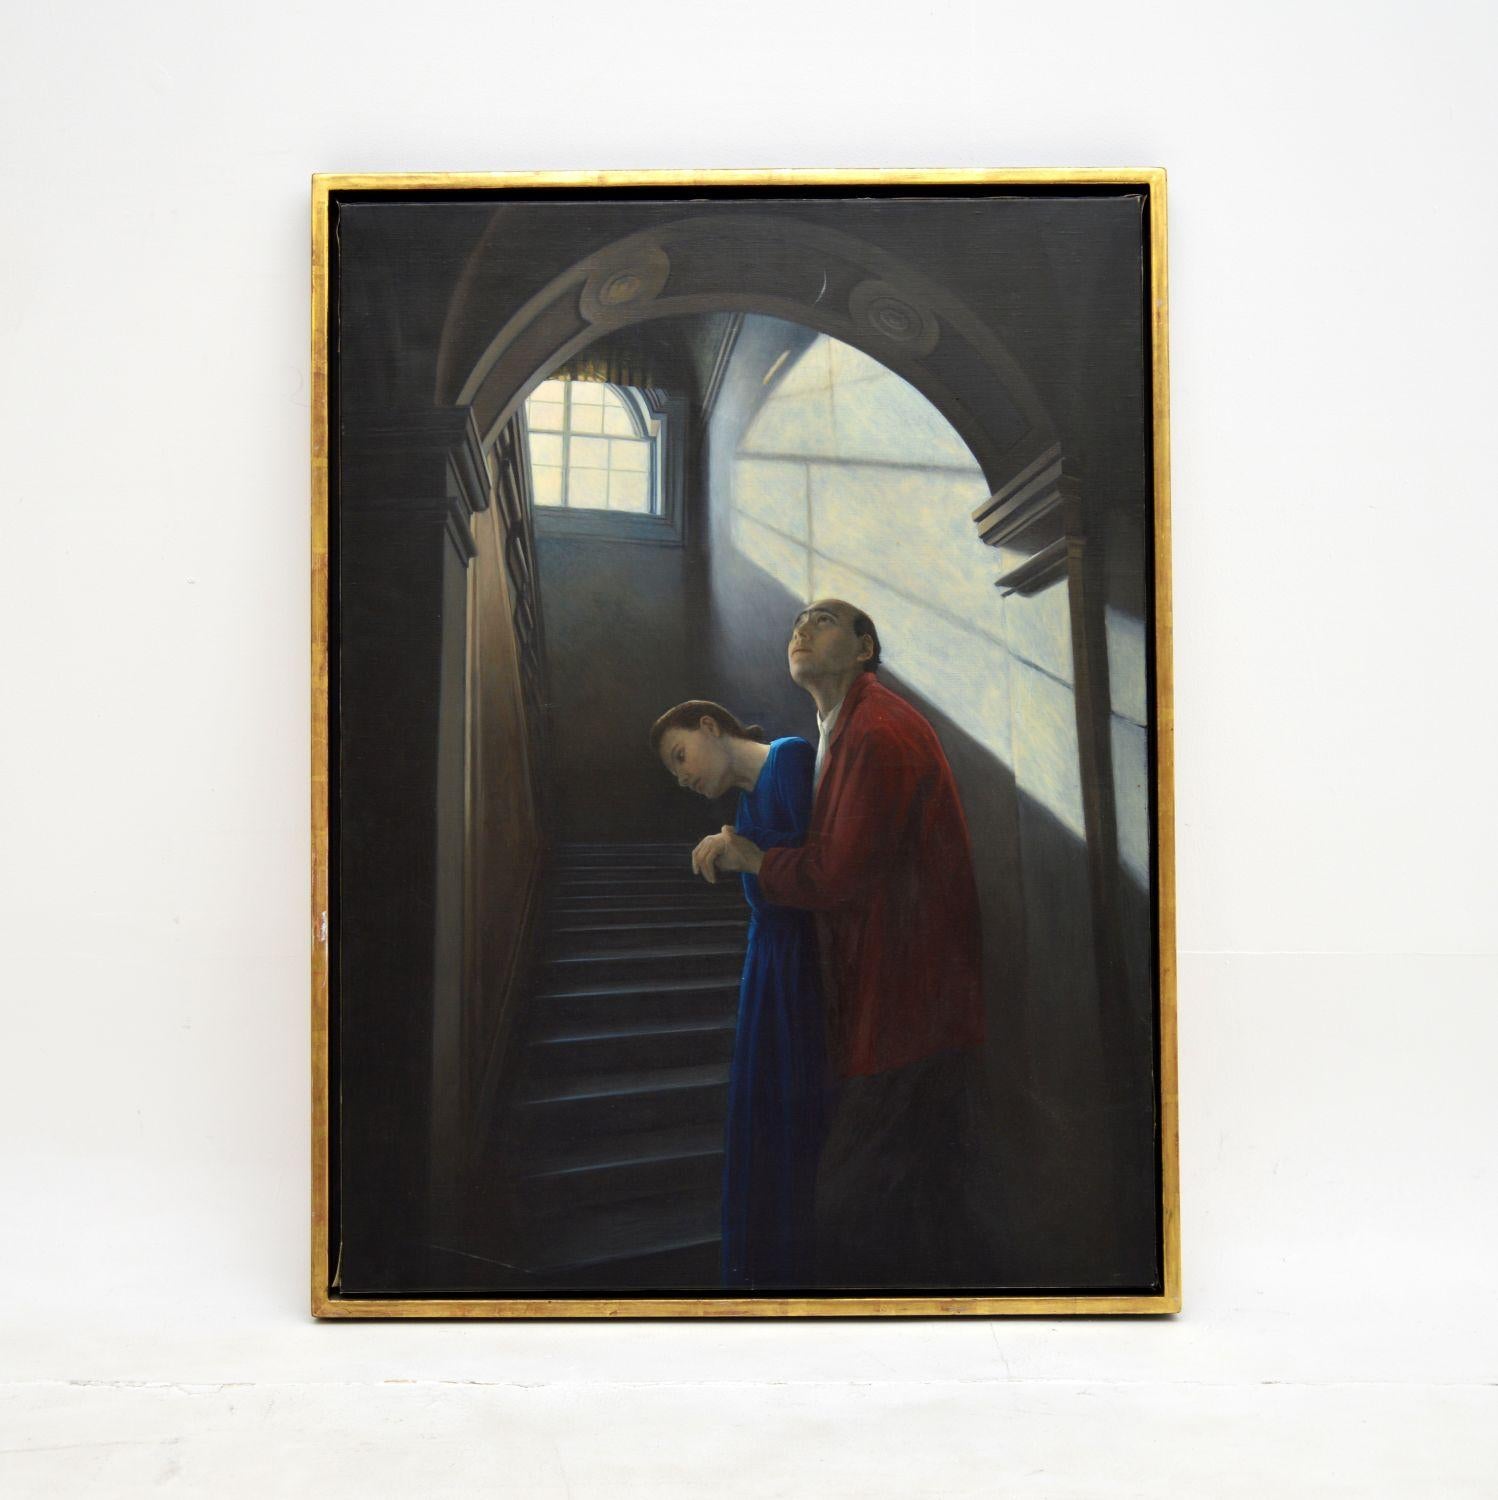 A beautiful original oil painting by well known artist Genevieve Dael (French, born 1947).

This is extremely well executed, it depicts a couple in a mysterious and atmospheric scene.

This was created in 1993 and was originally in the Francis Kyle